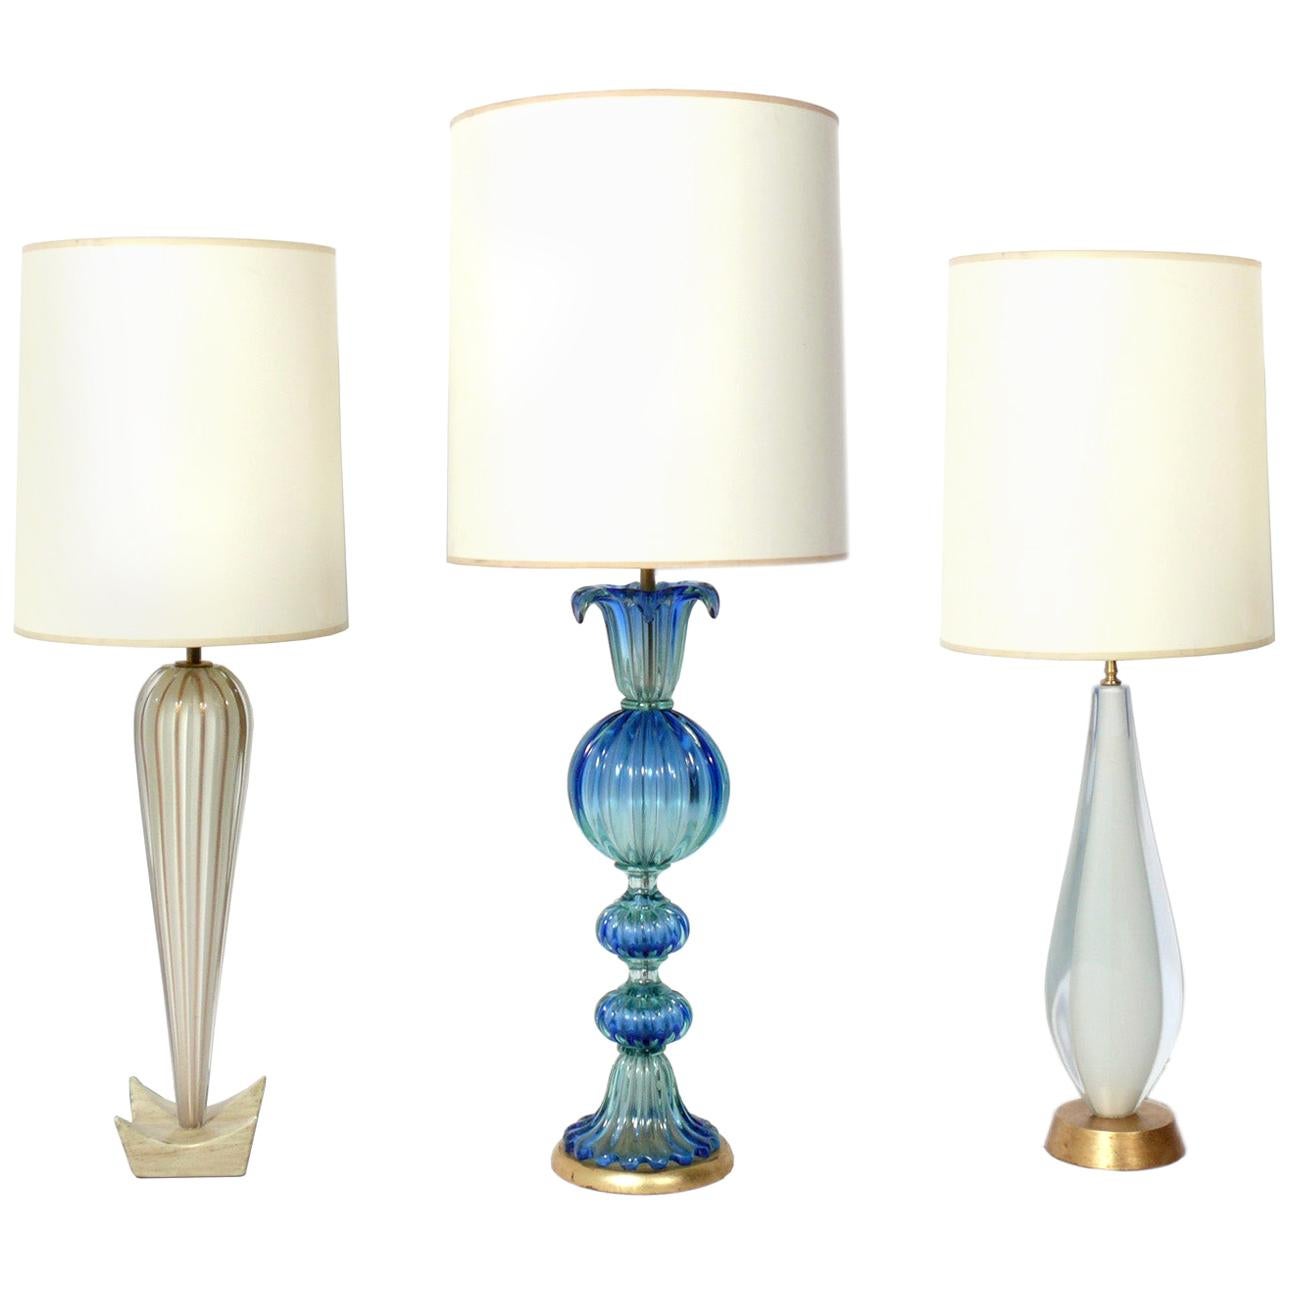 Selection of Midcentury Murano Glass Lamps